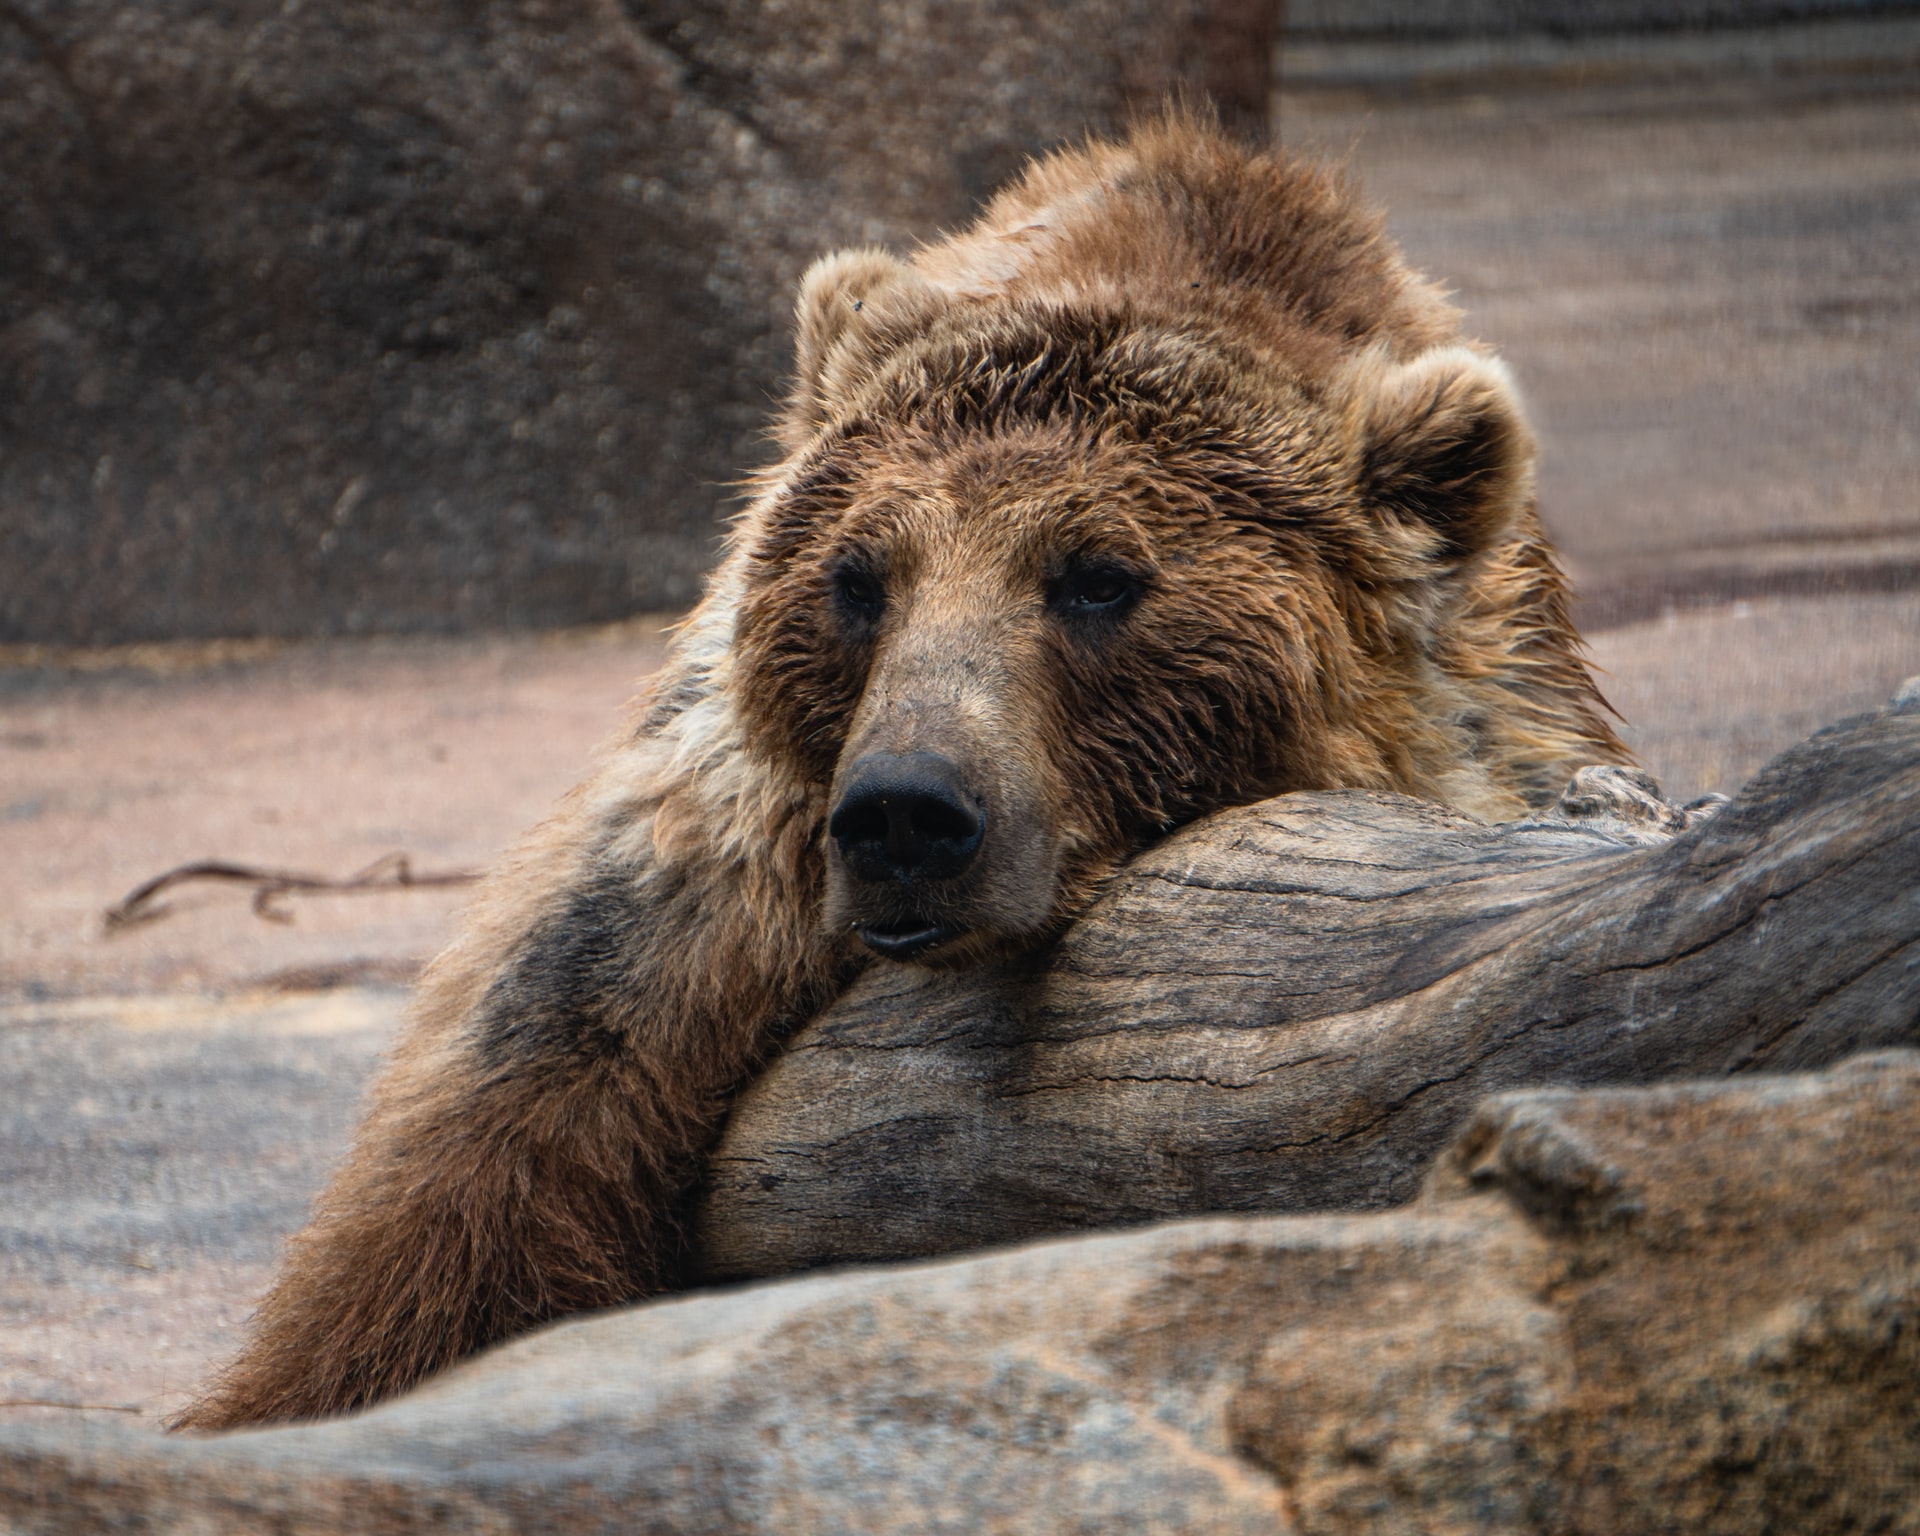 How Fast is The Grizzly Bear?